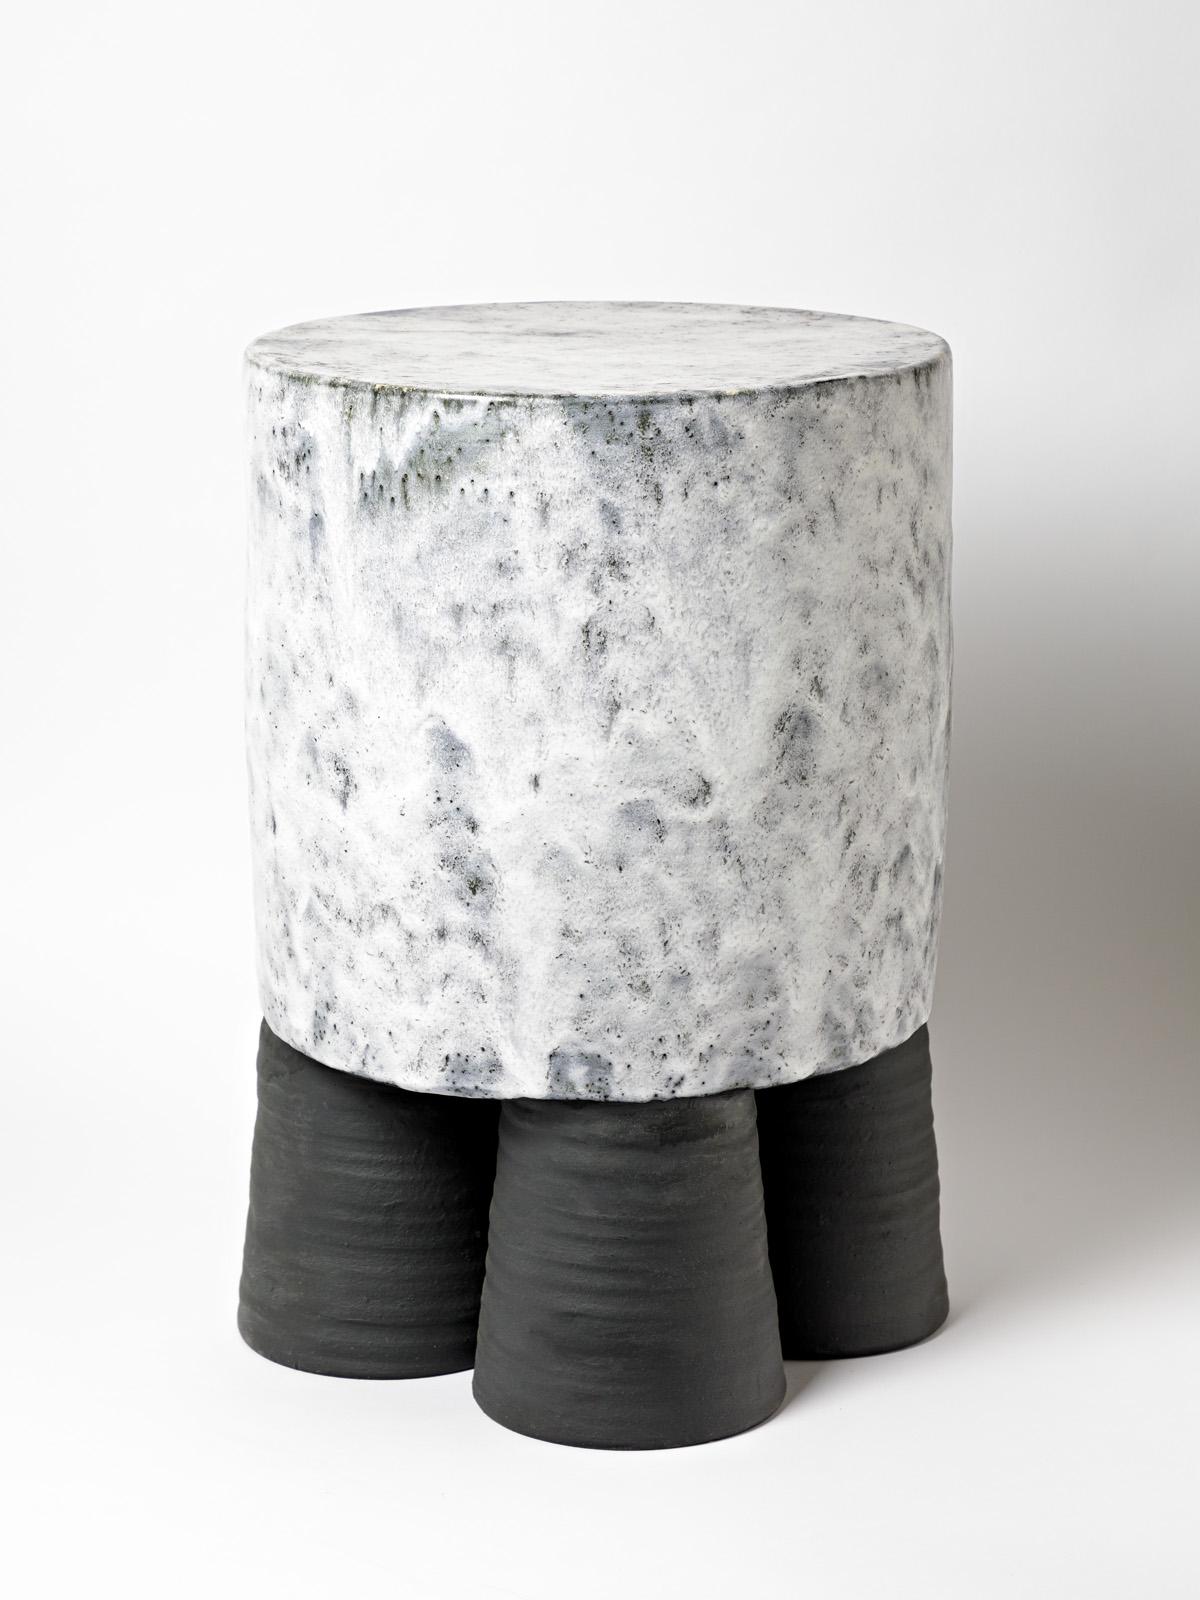 A ceramic stool or table with glazes decoration by Mia Jensen.
Unique piece.
Signed under the base,
circa 2022.